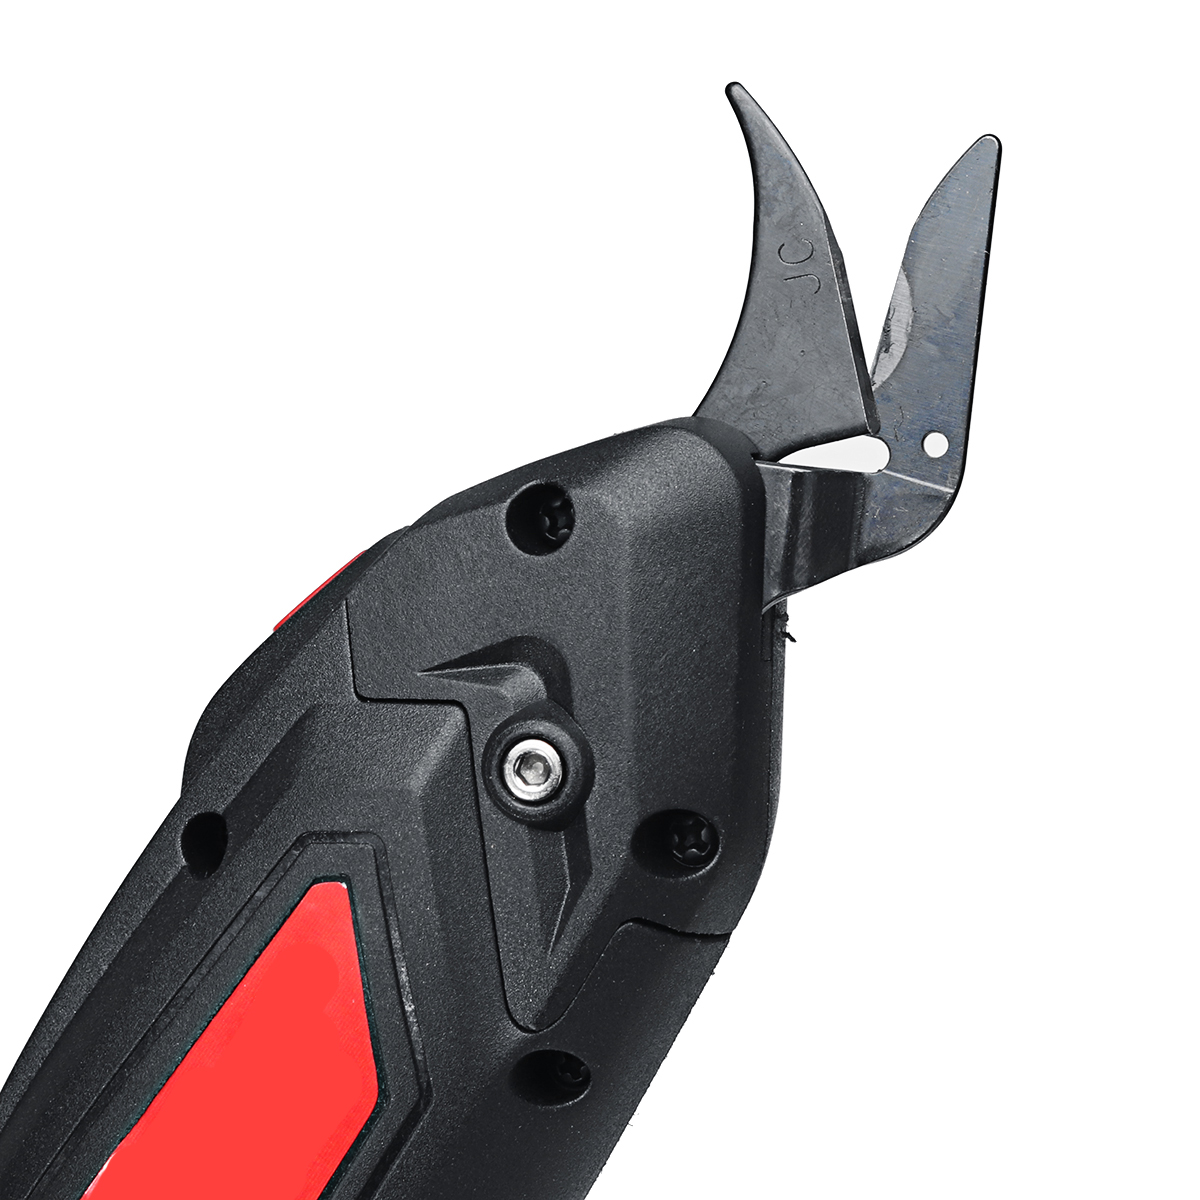 WiredCordless-Potable-Electric-Scissors-Leather-Fabric-Crafts-Cutting-Blade-Trimmer-1716218-9